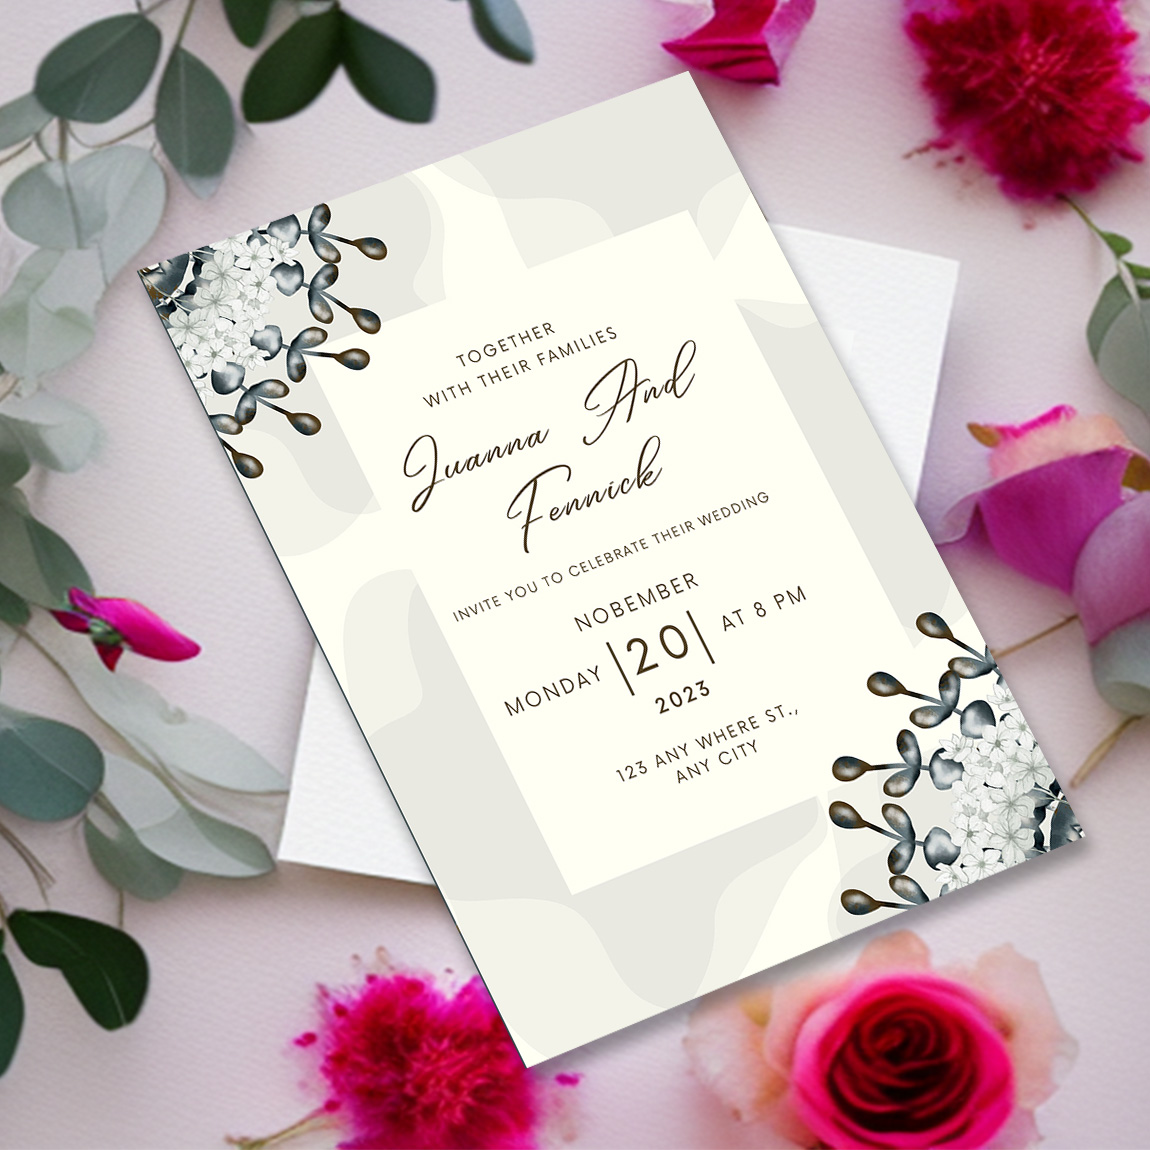 Image with enchanting wedding invitation with flowers.